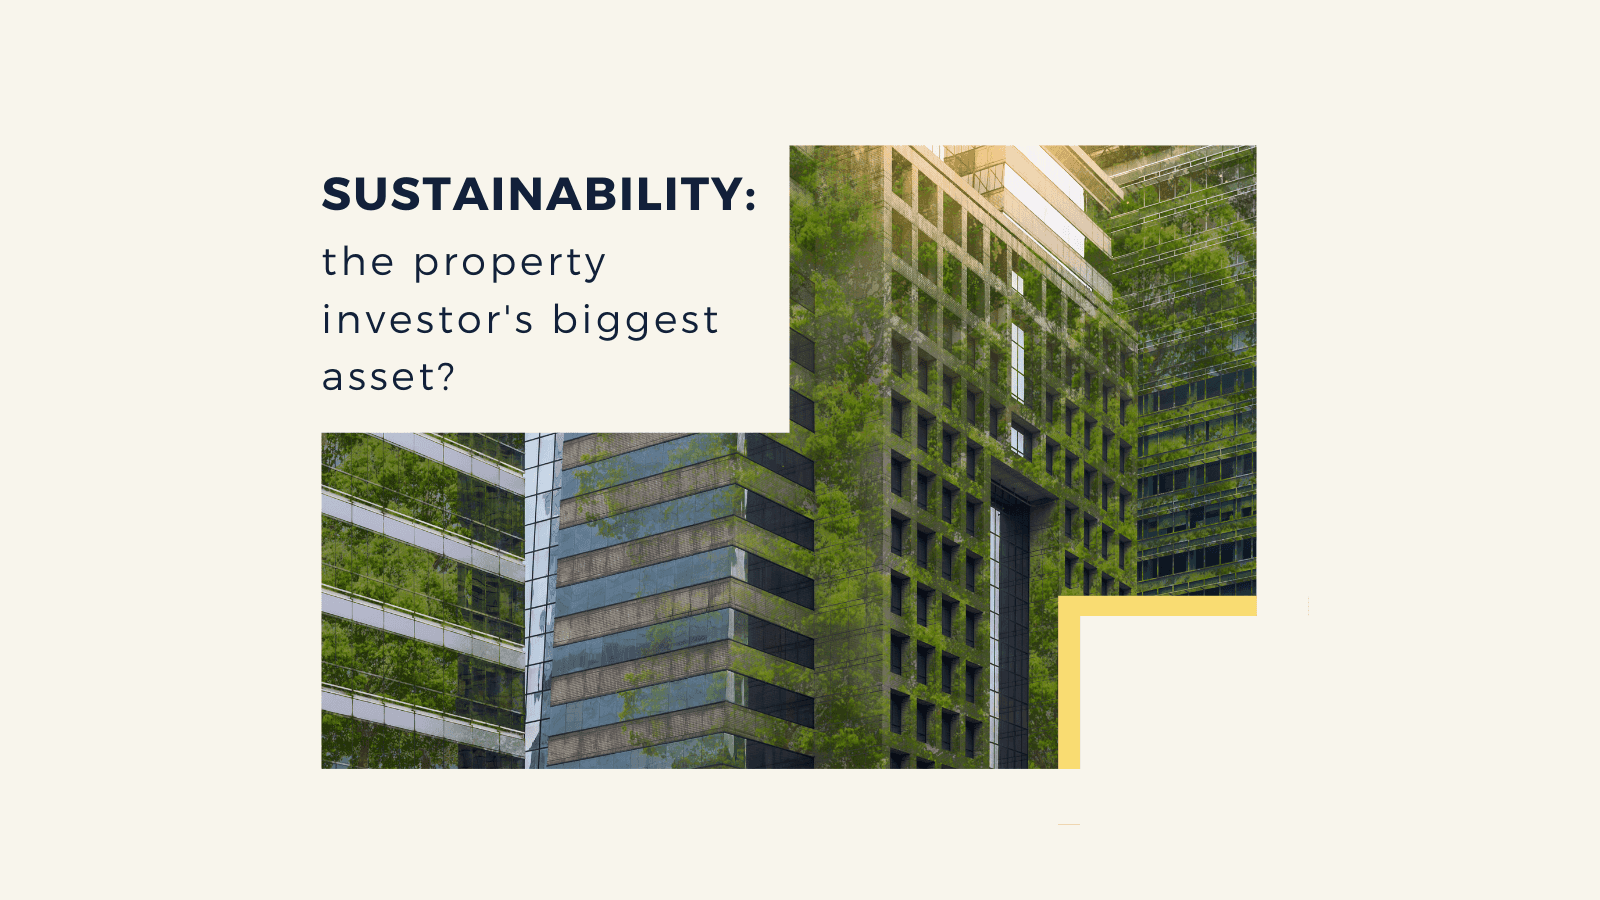  Sustainability: the property investor's biggest asset?